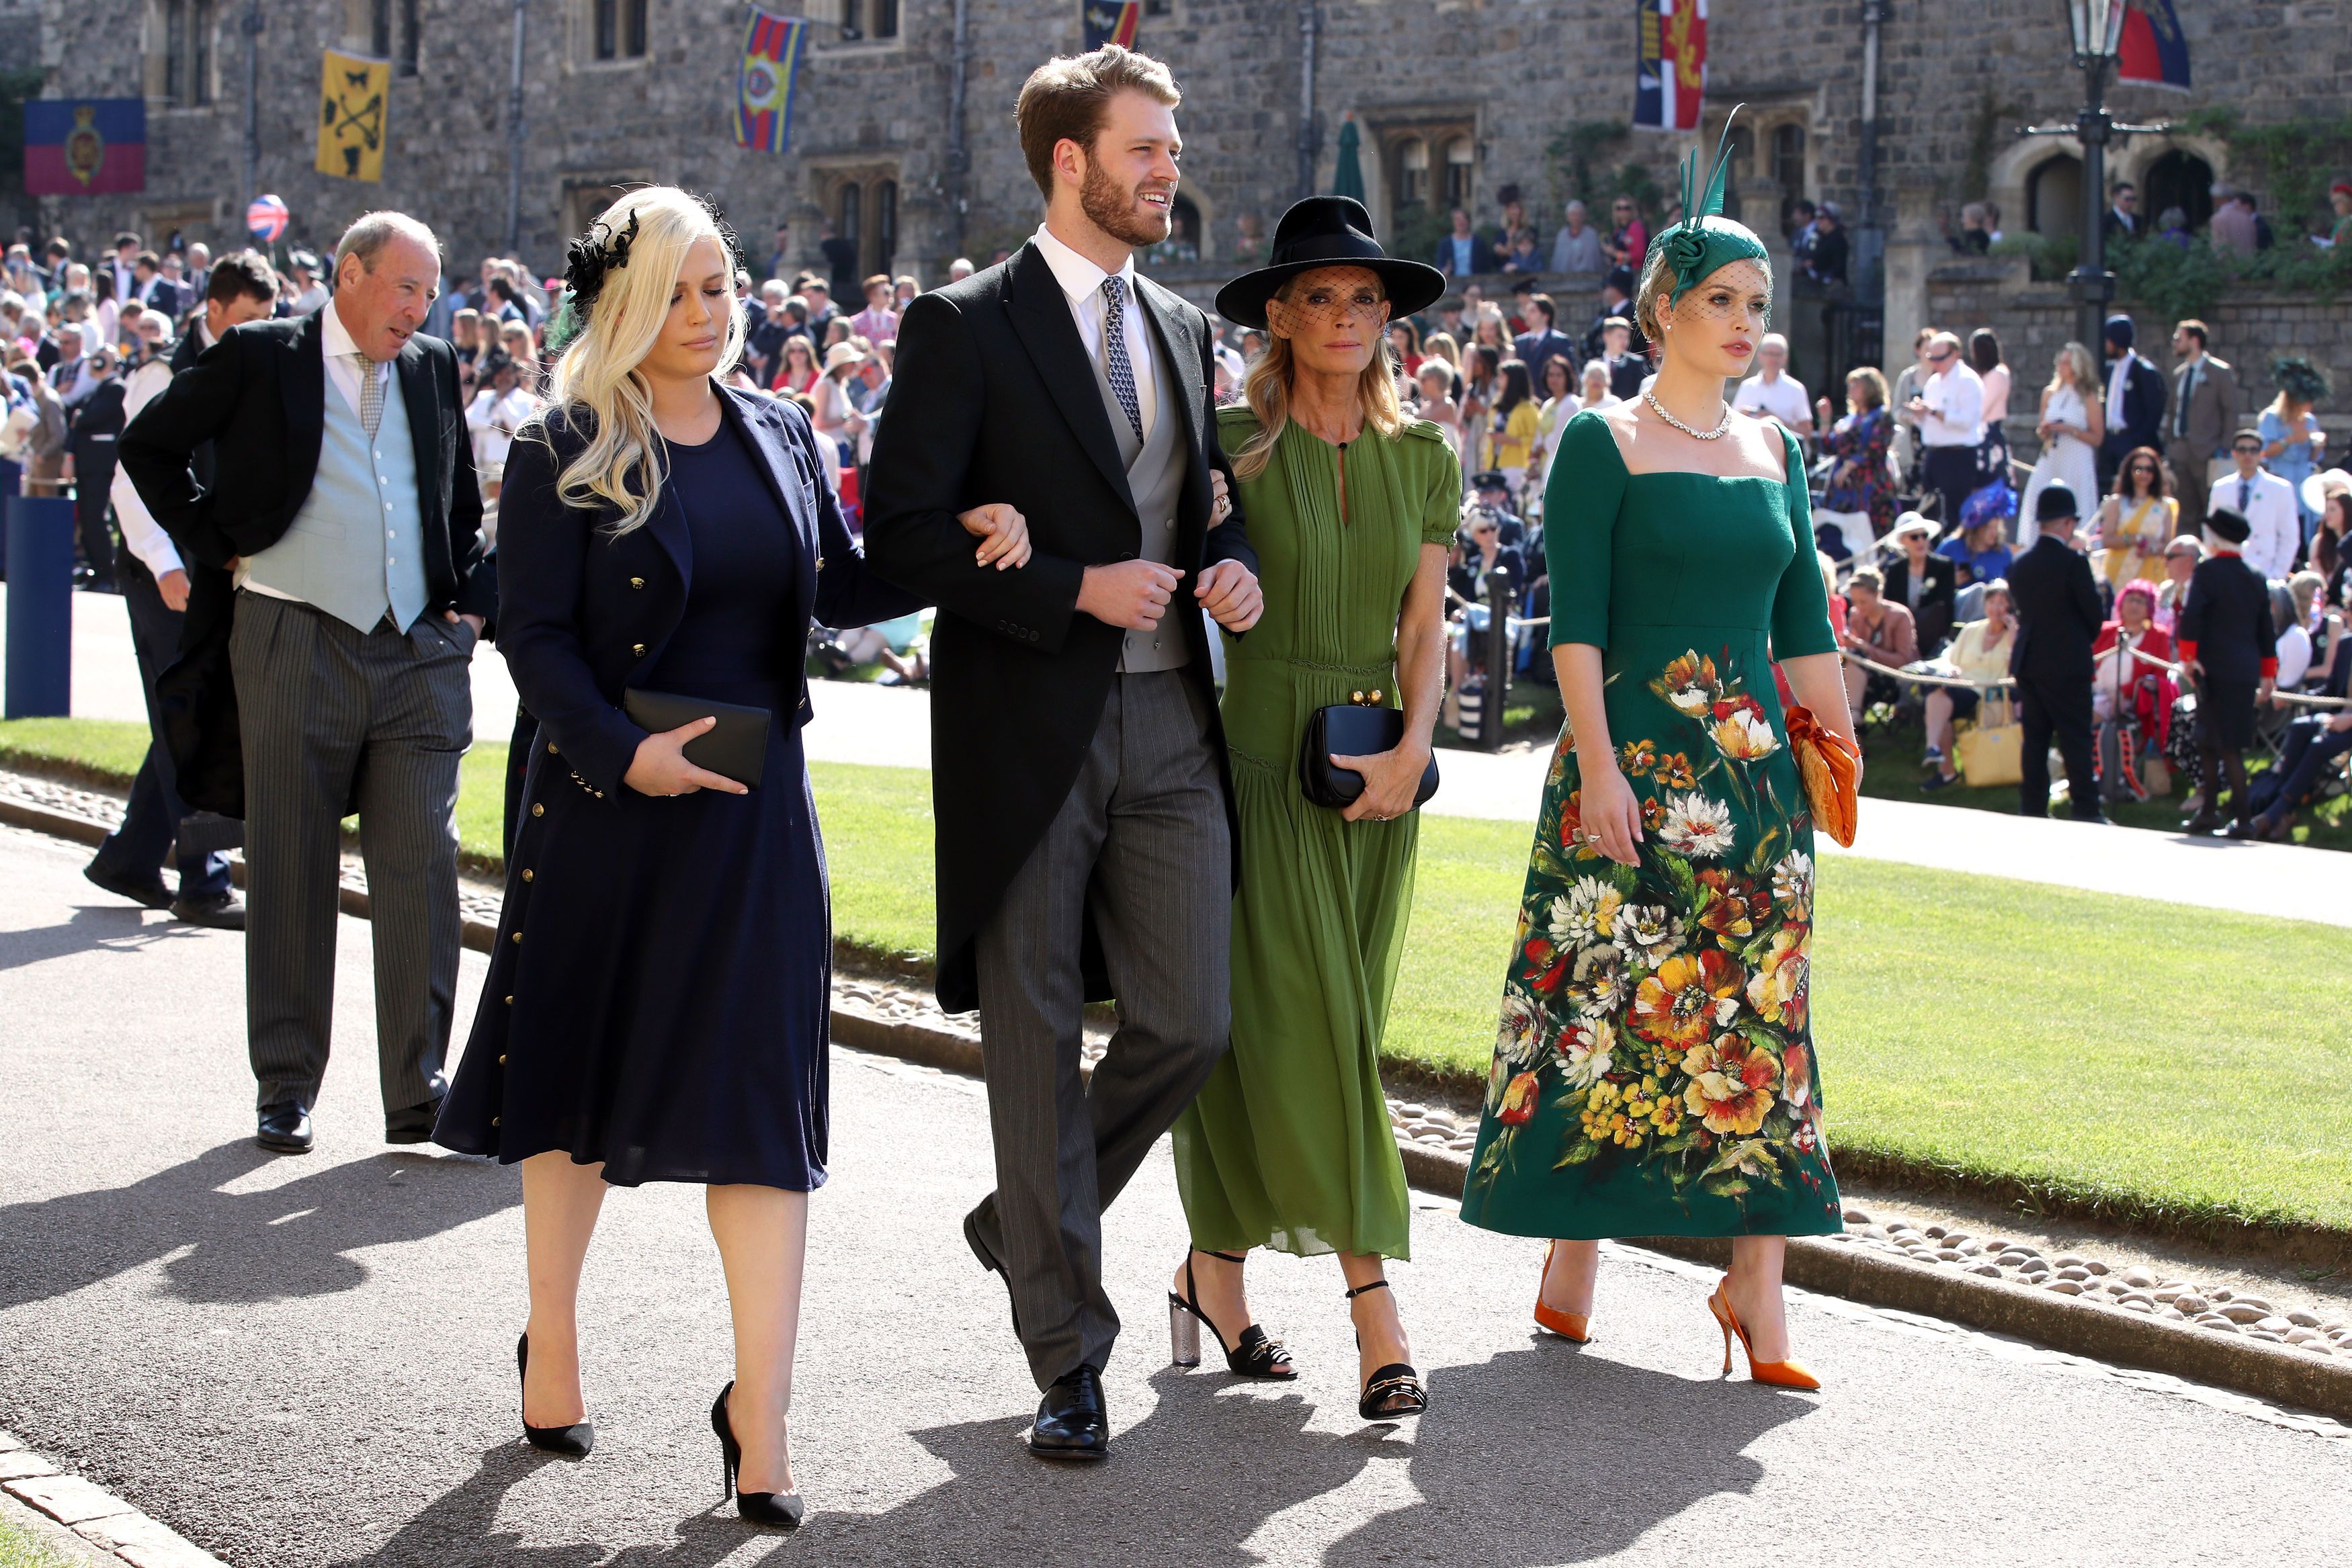 Eliza and Louis Spencer, Victoria Aitken, and Kitty Spencer at Prince Harry and Meghan Markle's wedding ceremony at Windsor Castle on May 19, 2018, in England | Photo: Chris Radburn - WPA Pool/Getty Images